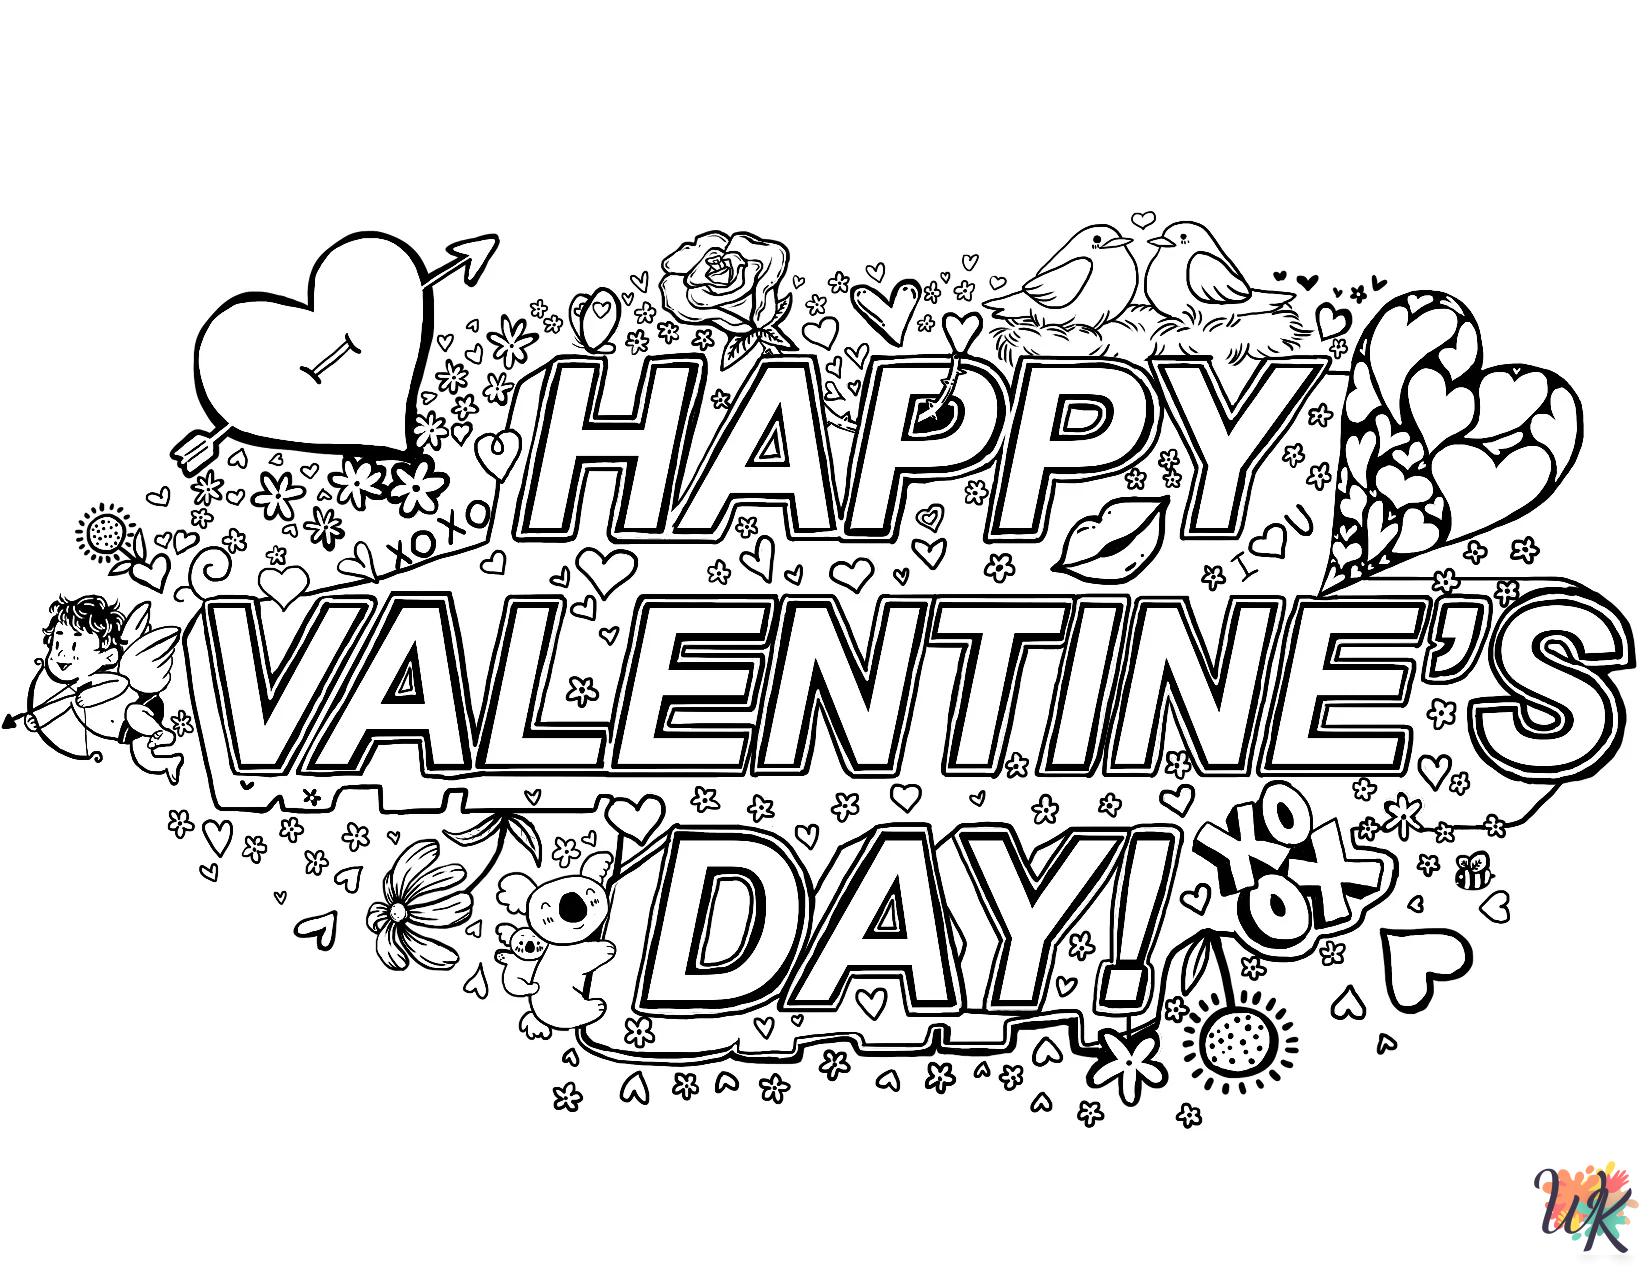 Valentine's Day themed coloring pages